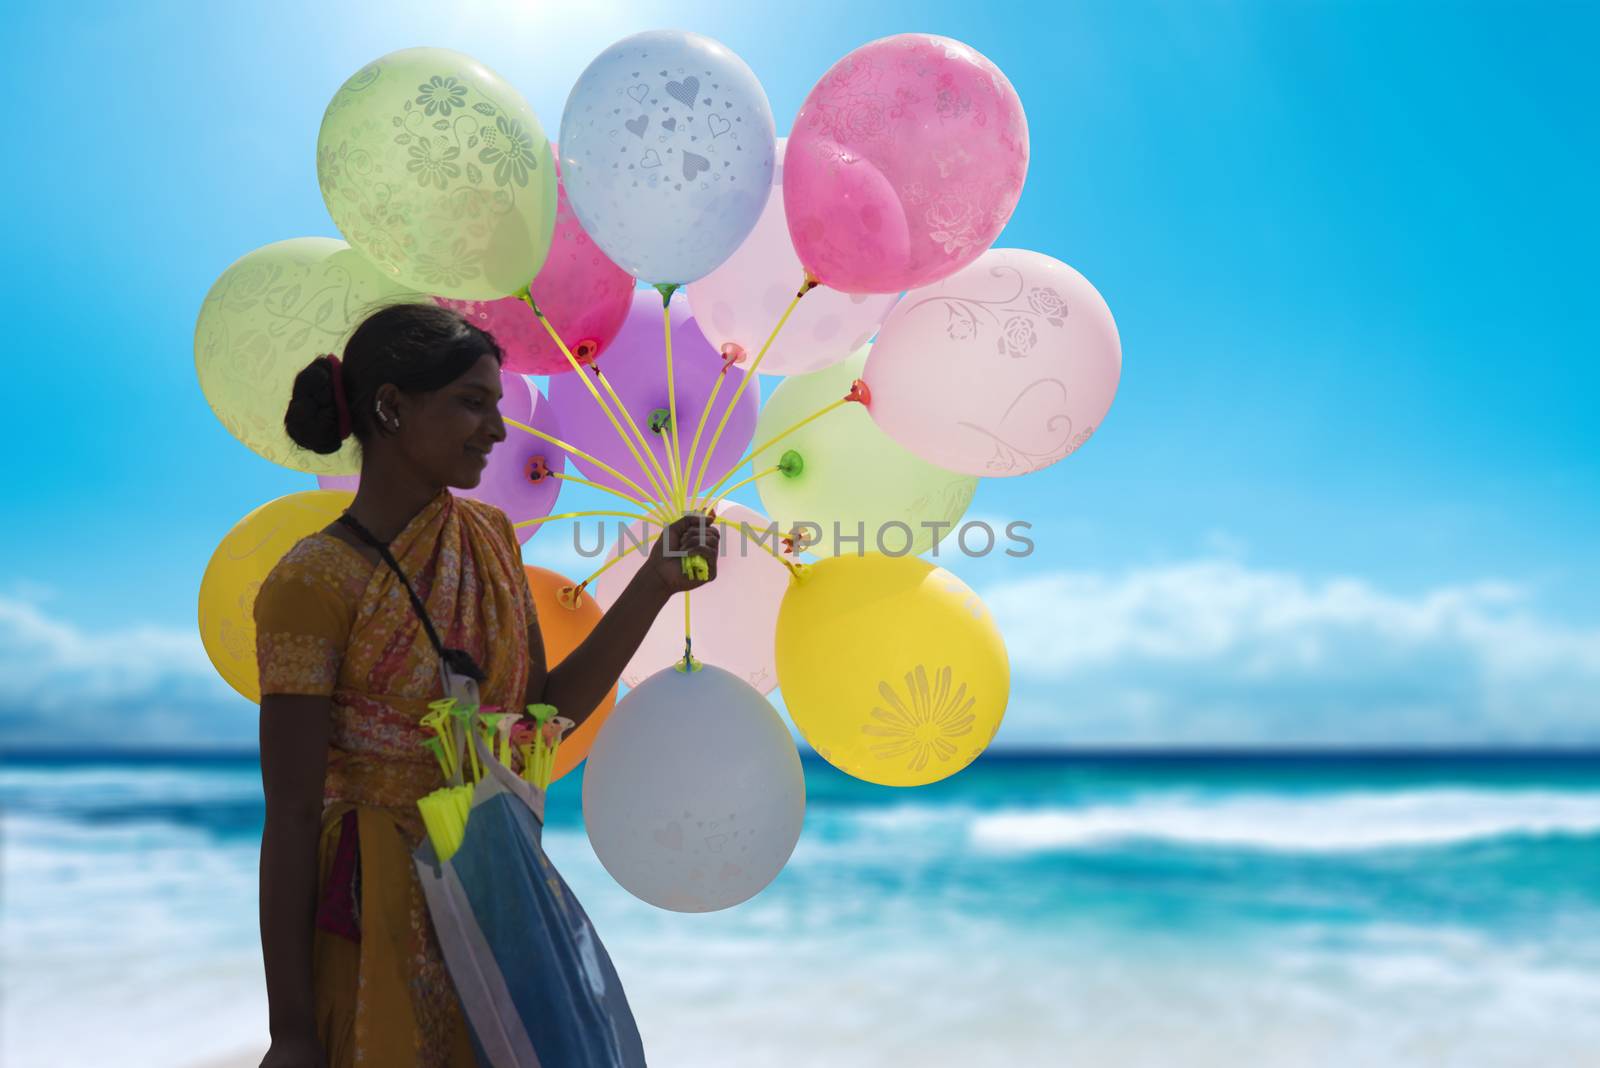 Indian hawker holding a bunch of colorful balloons at a beach and selling them to make a living.